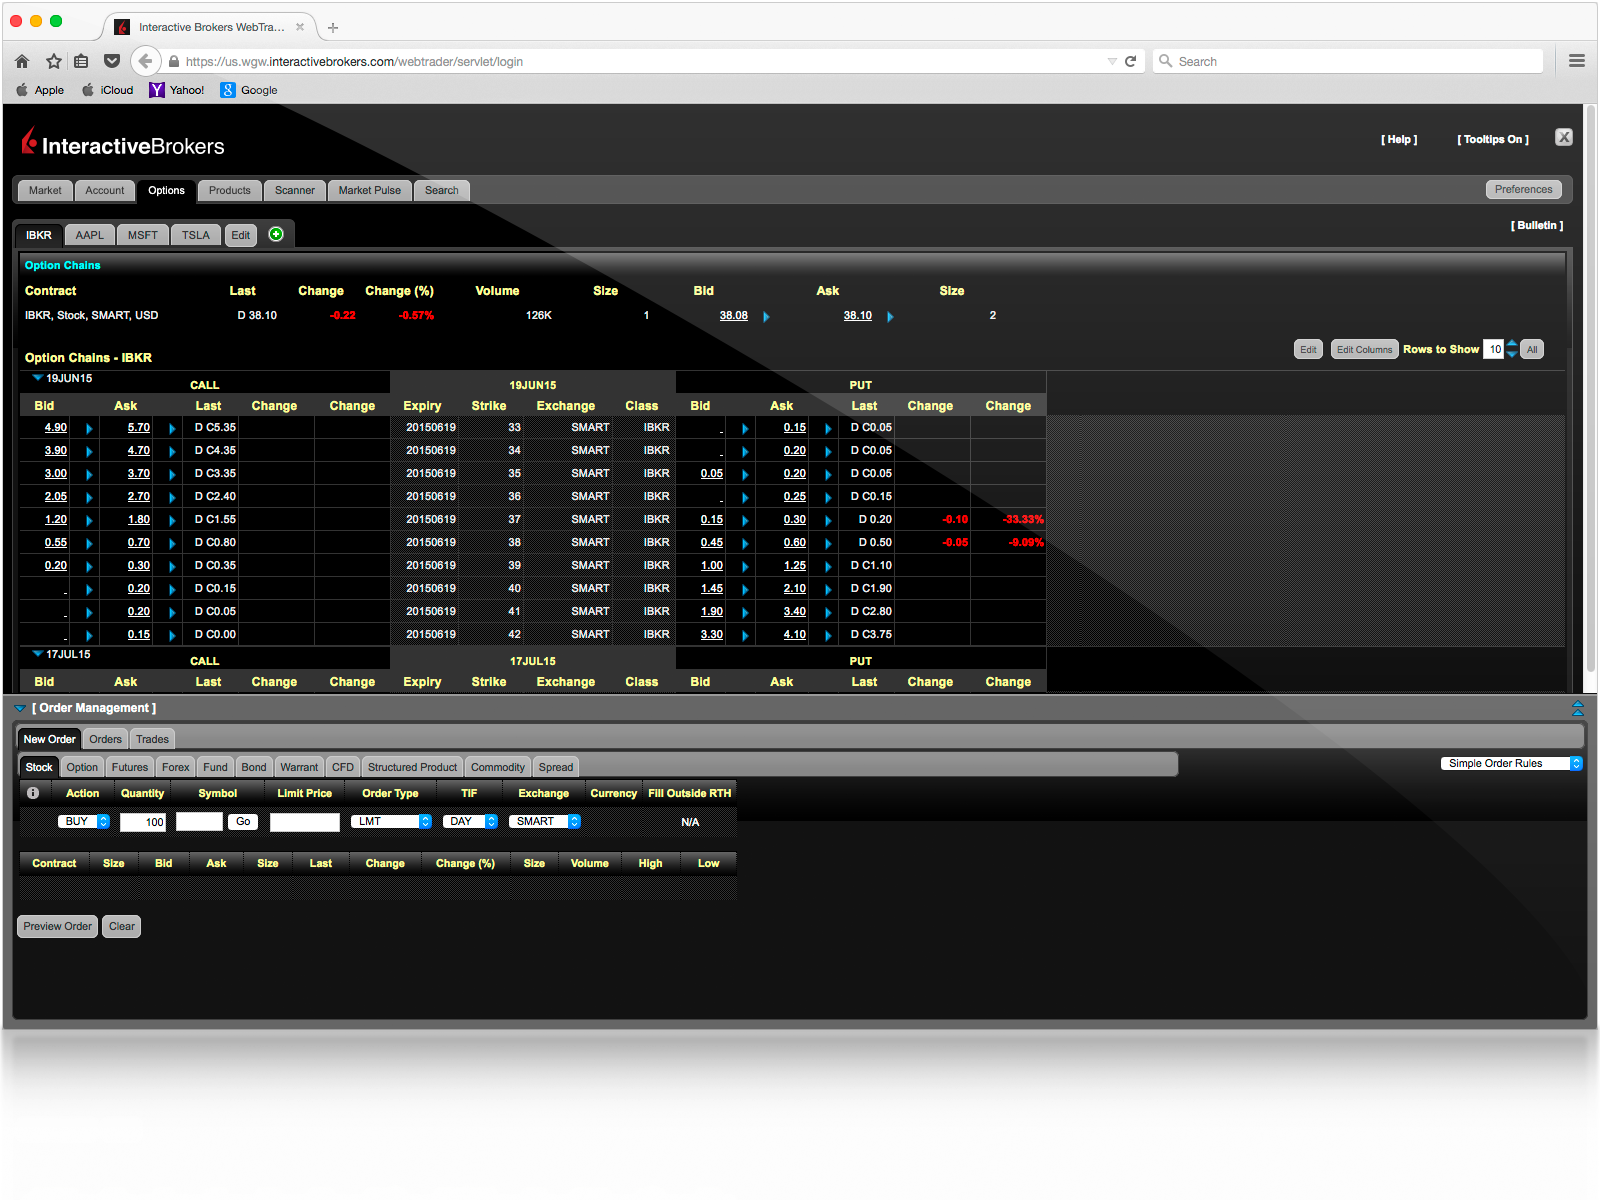 How to trade forex interactive brokers